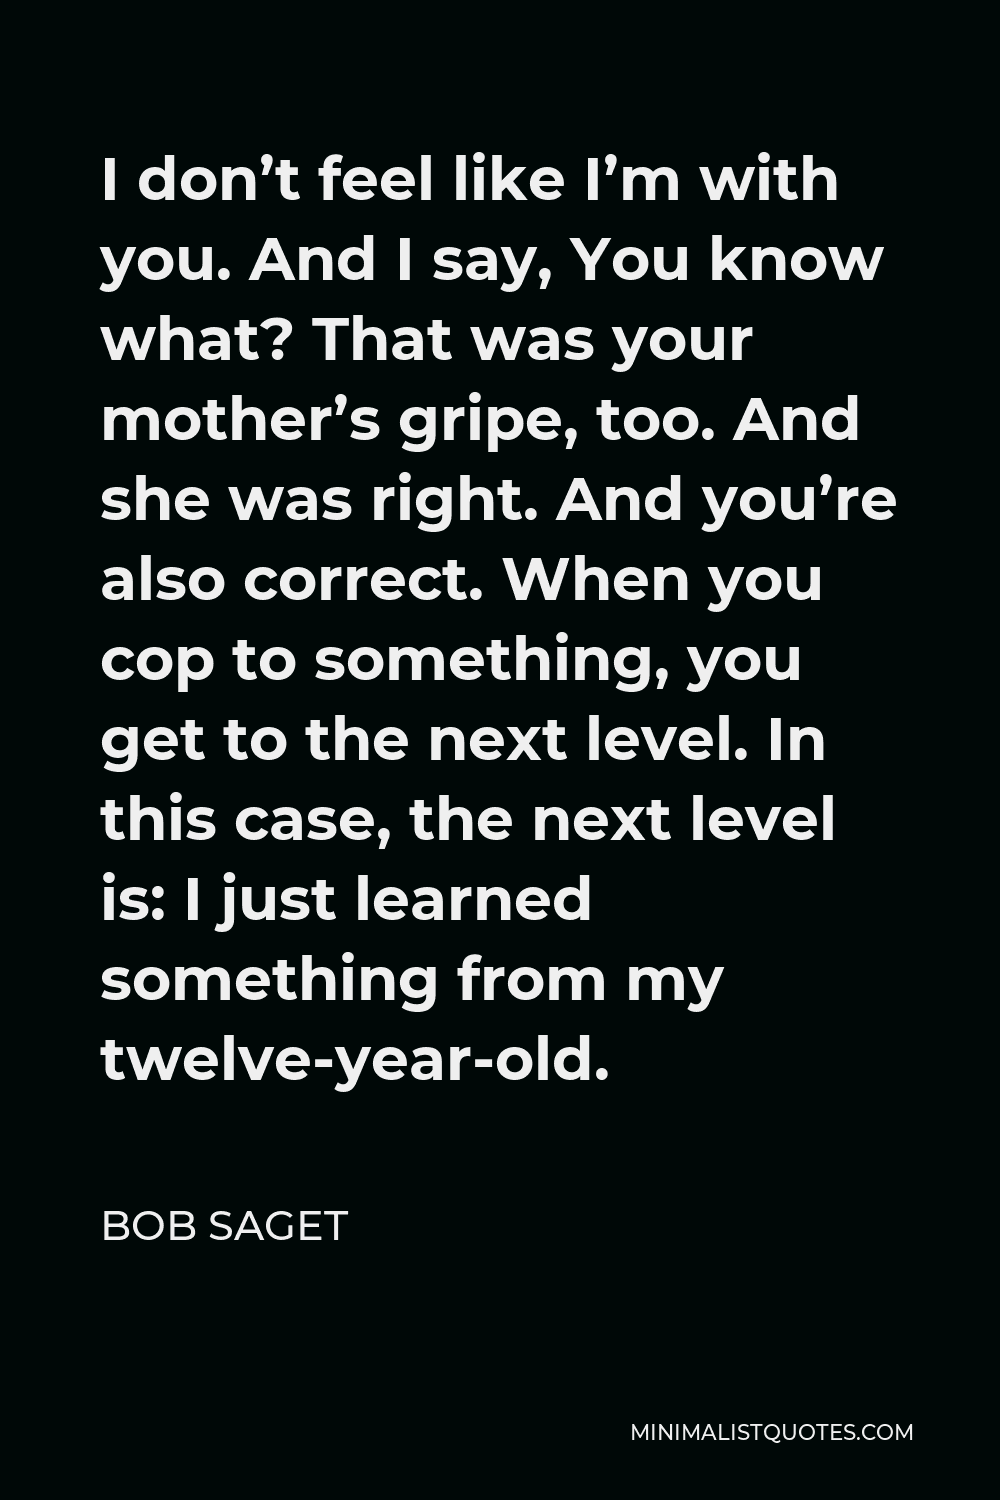 Bob Saget Quote - I don’t feel like I’m with you. And I say, You know what? That was your mother’s gripe, too. And she was right. And you’re also correct. When you cop to something, you get to the next level. In this case, the next level is: I just learned something from my twelve-year-old.